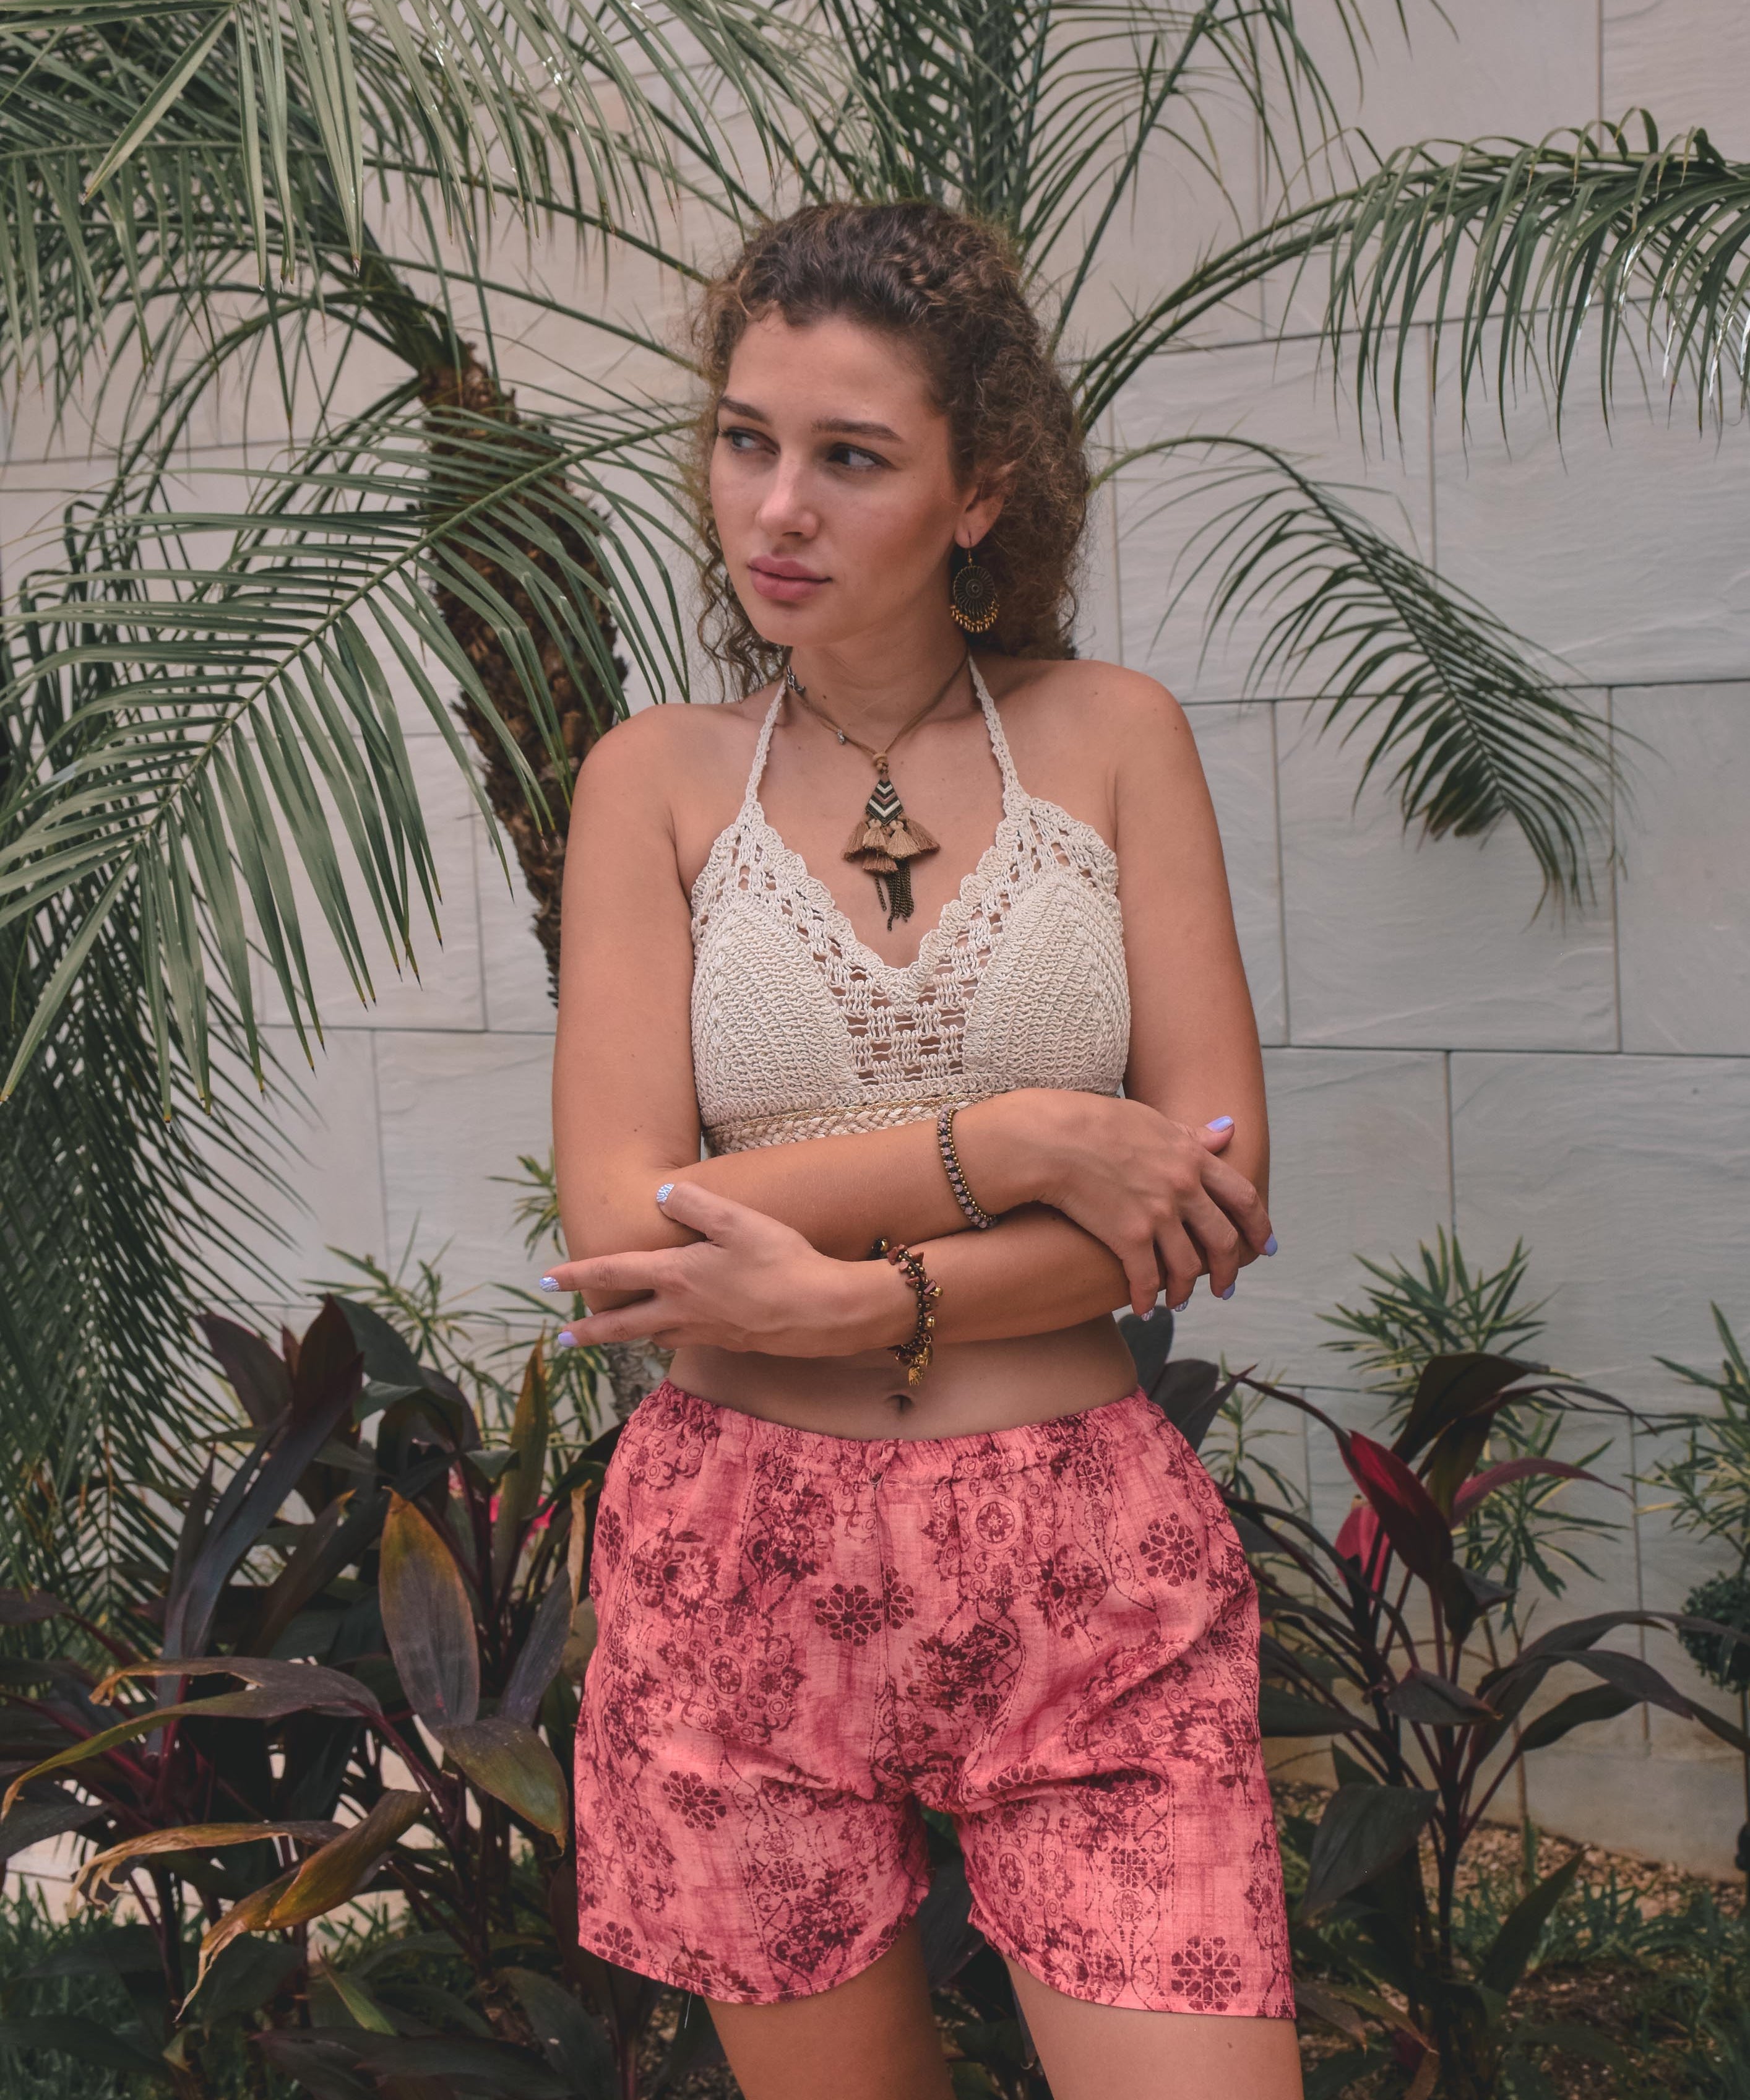 JAIPUR SHORTS Elepanta Women's Shorts - Buy Today Elephant Pants Jewelry And Bohemian Clothes Handmade In Thailand Help To Save The Elephants FairTrade And Vegan